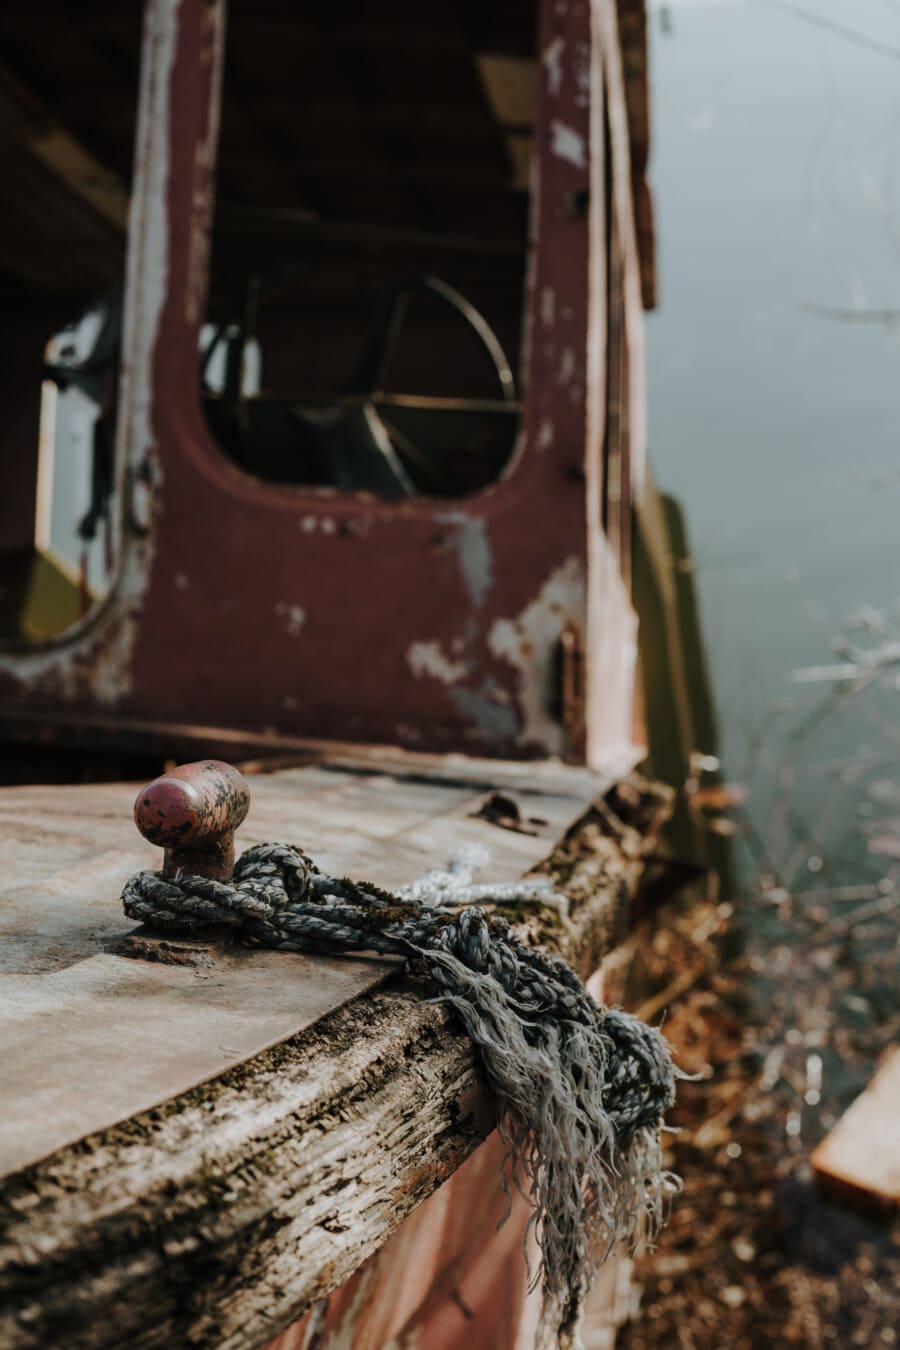 shipwreck, ship, old, abandoned, wreckage, decay, watercraft, rope, wood, water